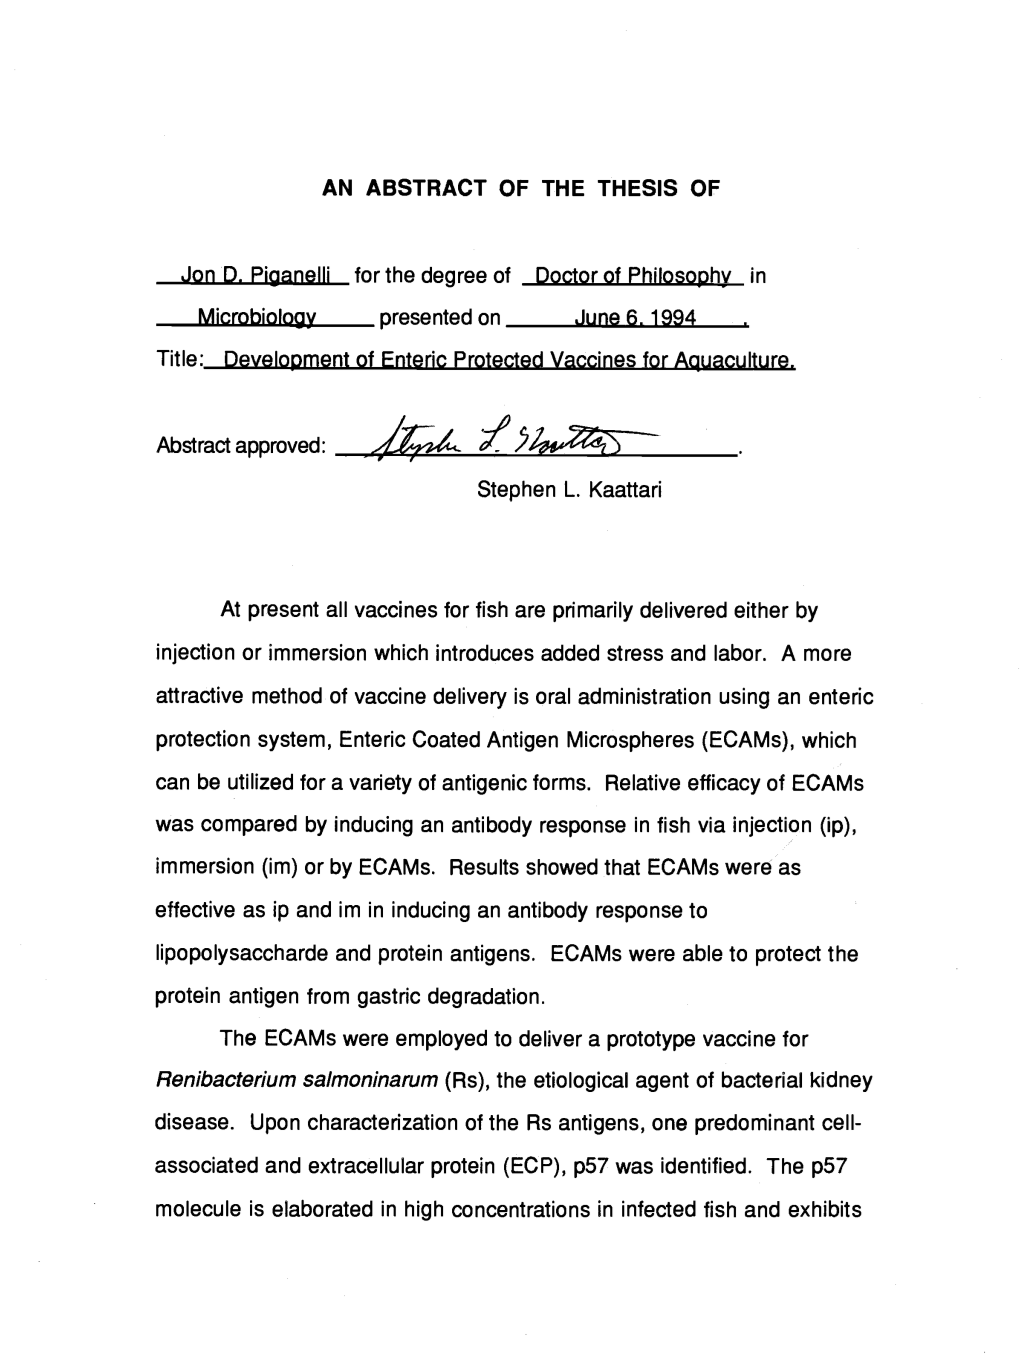 AN ABSTRACT of the THESIS of Attractive Method of Vaccine